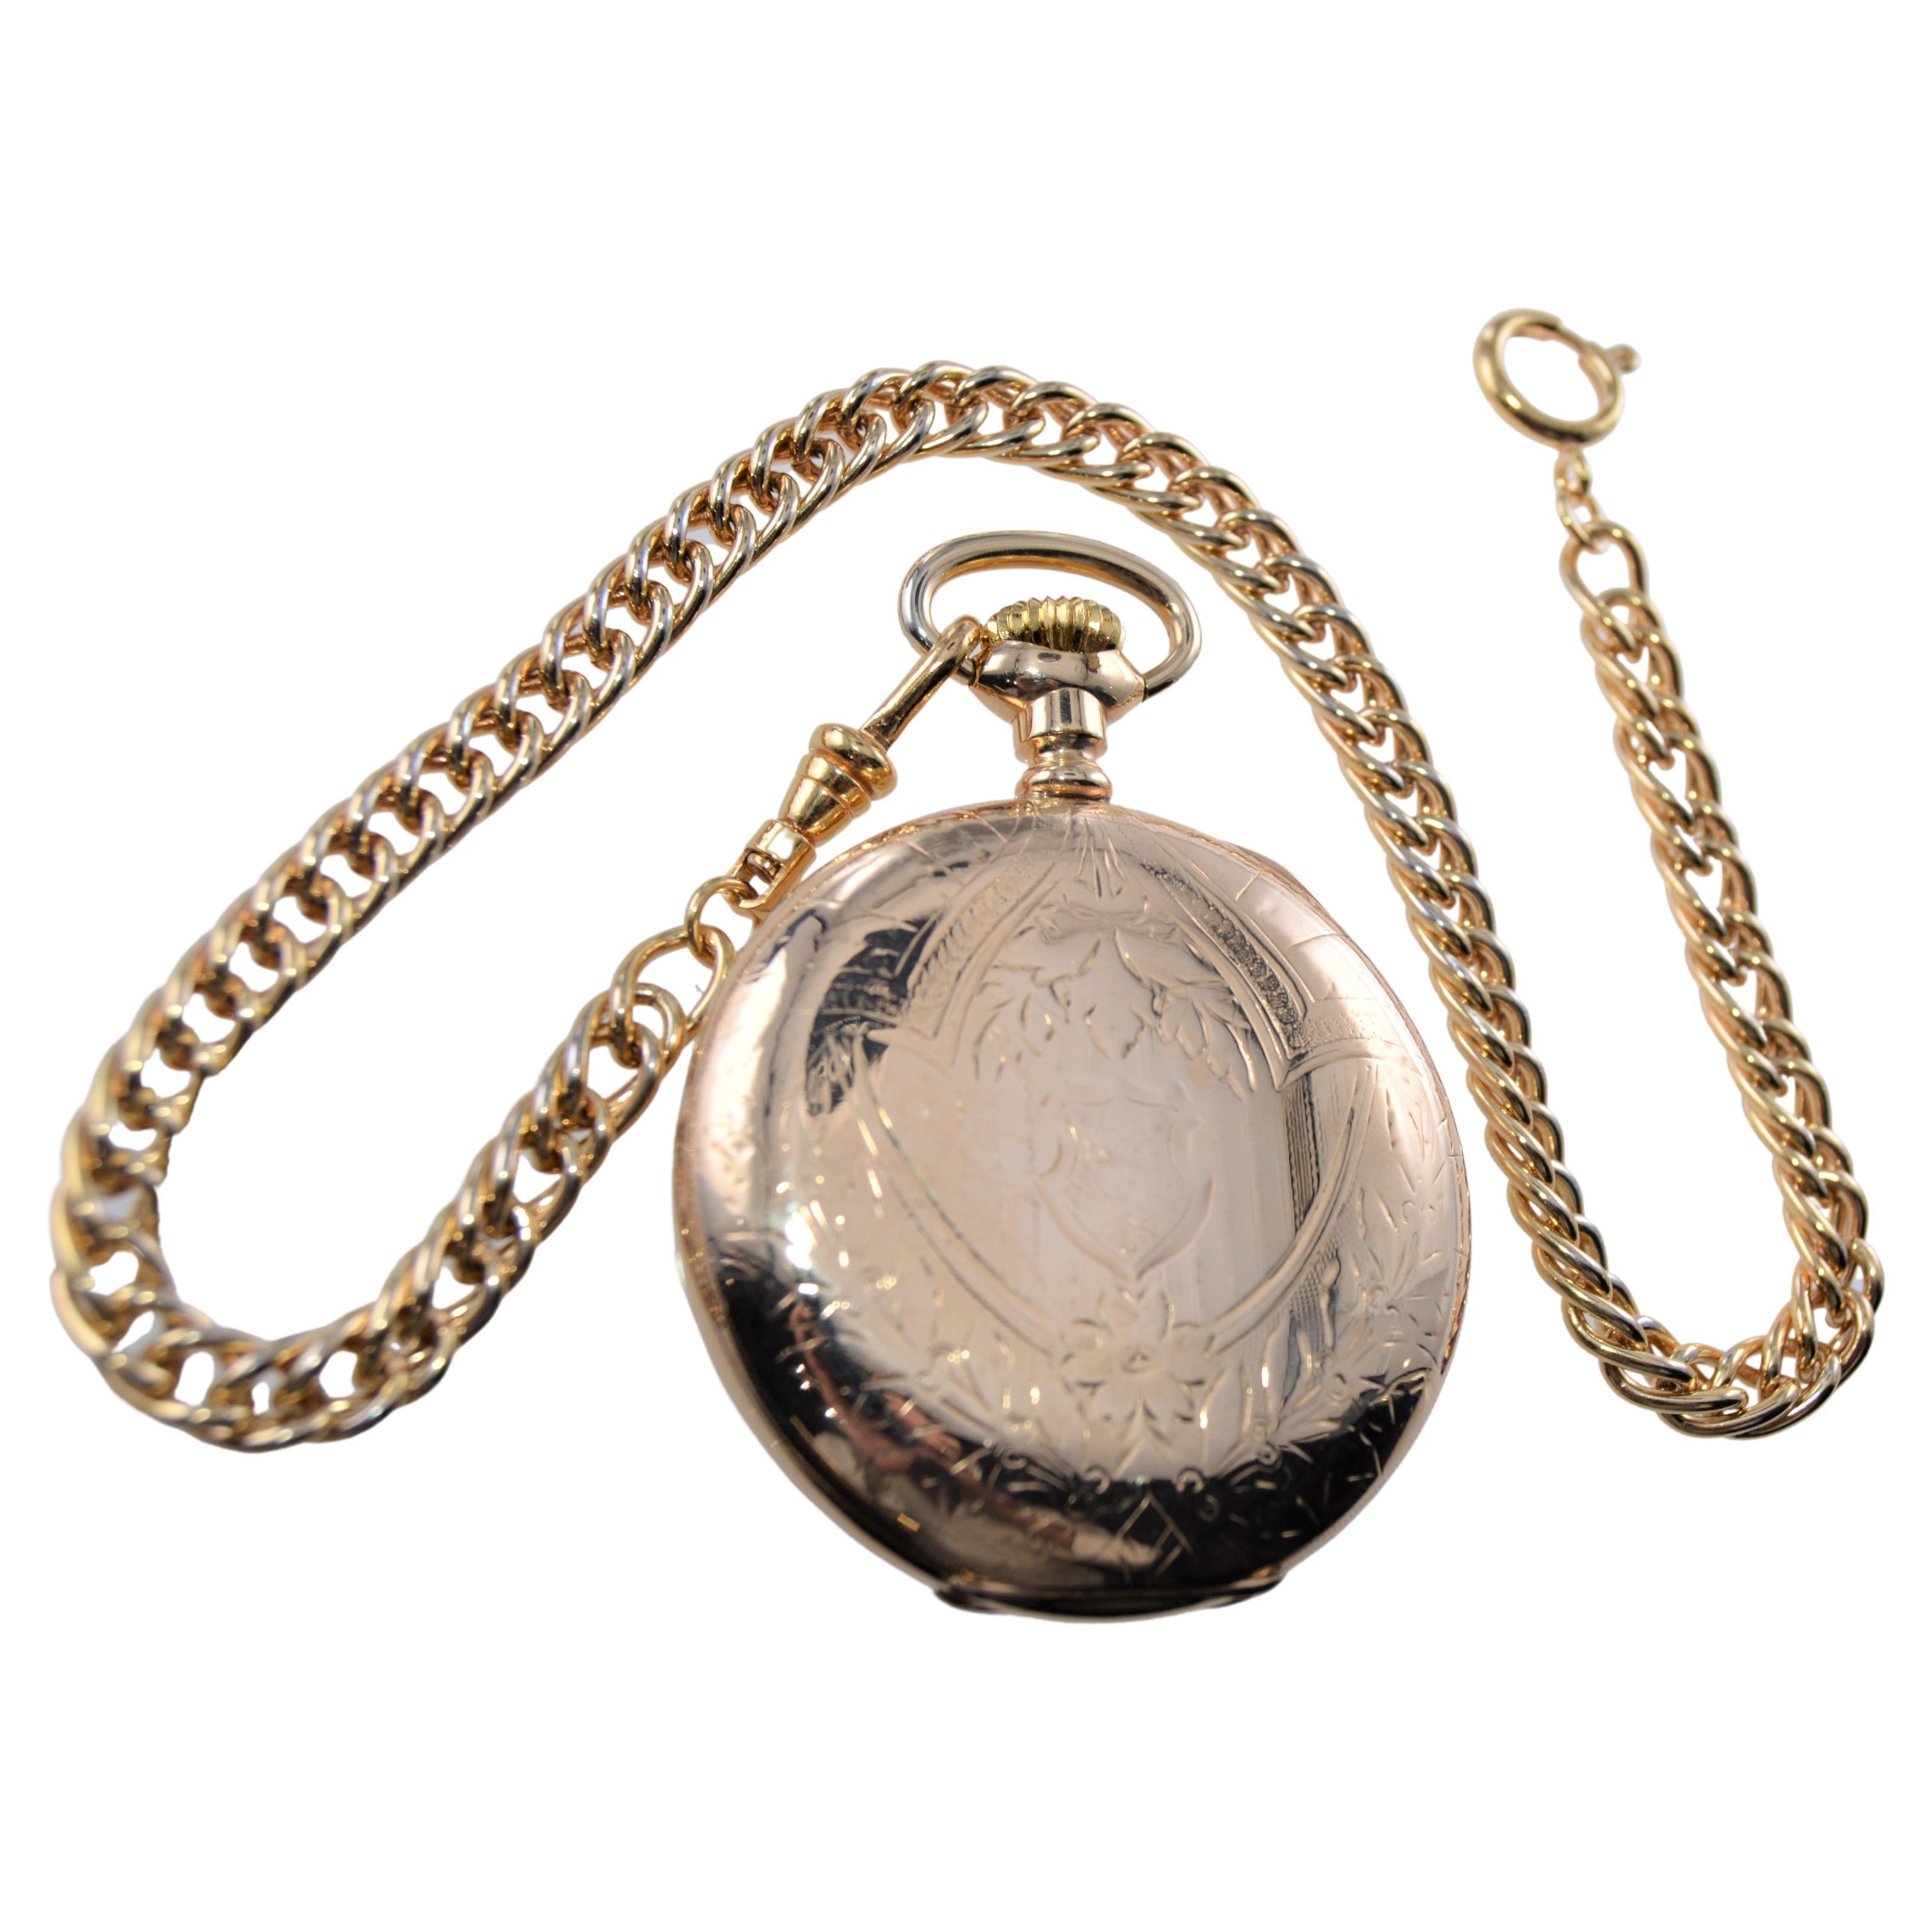 FACTORY / HOUSE: Waltham Watch Company
STYLE / REFERENCE: Open Faced Pocket Watch / 16 Size / Hand Engraved
METAL / MATERIAL: Yellow Gold Filled
CIRCA / YEAR: 1905 
DIMENSIONS / SIZE:  Diameter 50mm 
MOVEMENT / CALIBER: Manual Winding / 17 Jewels